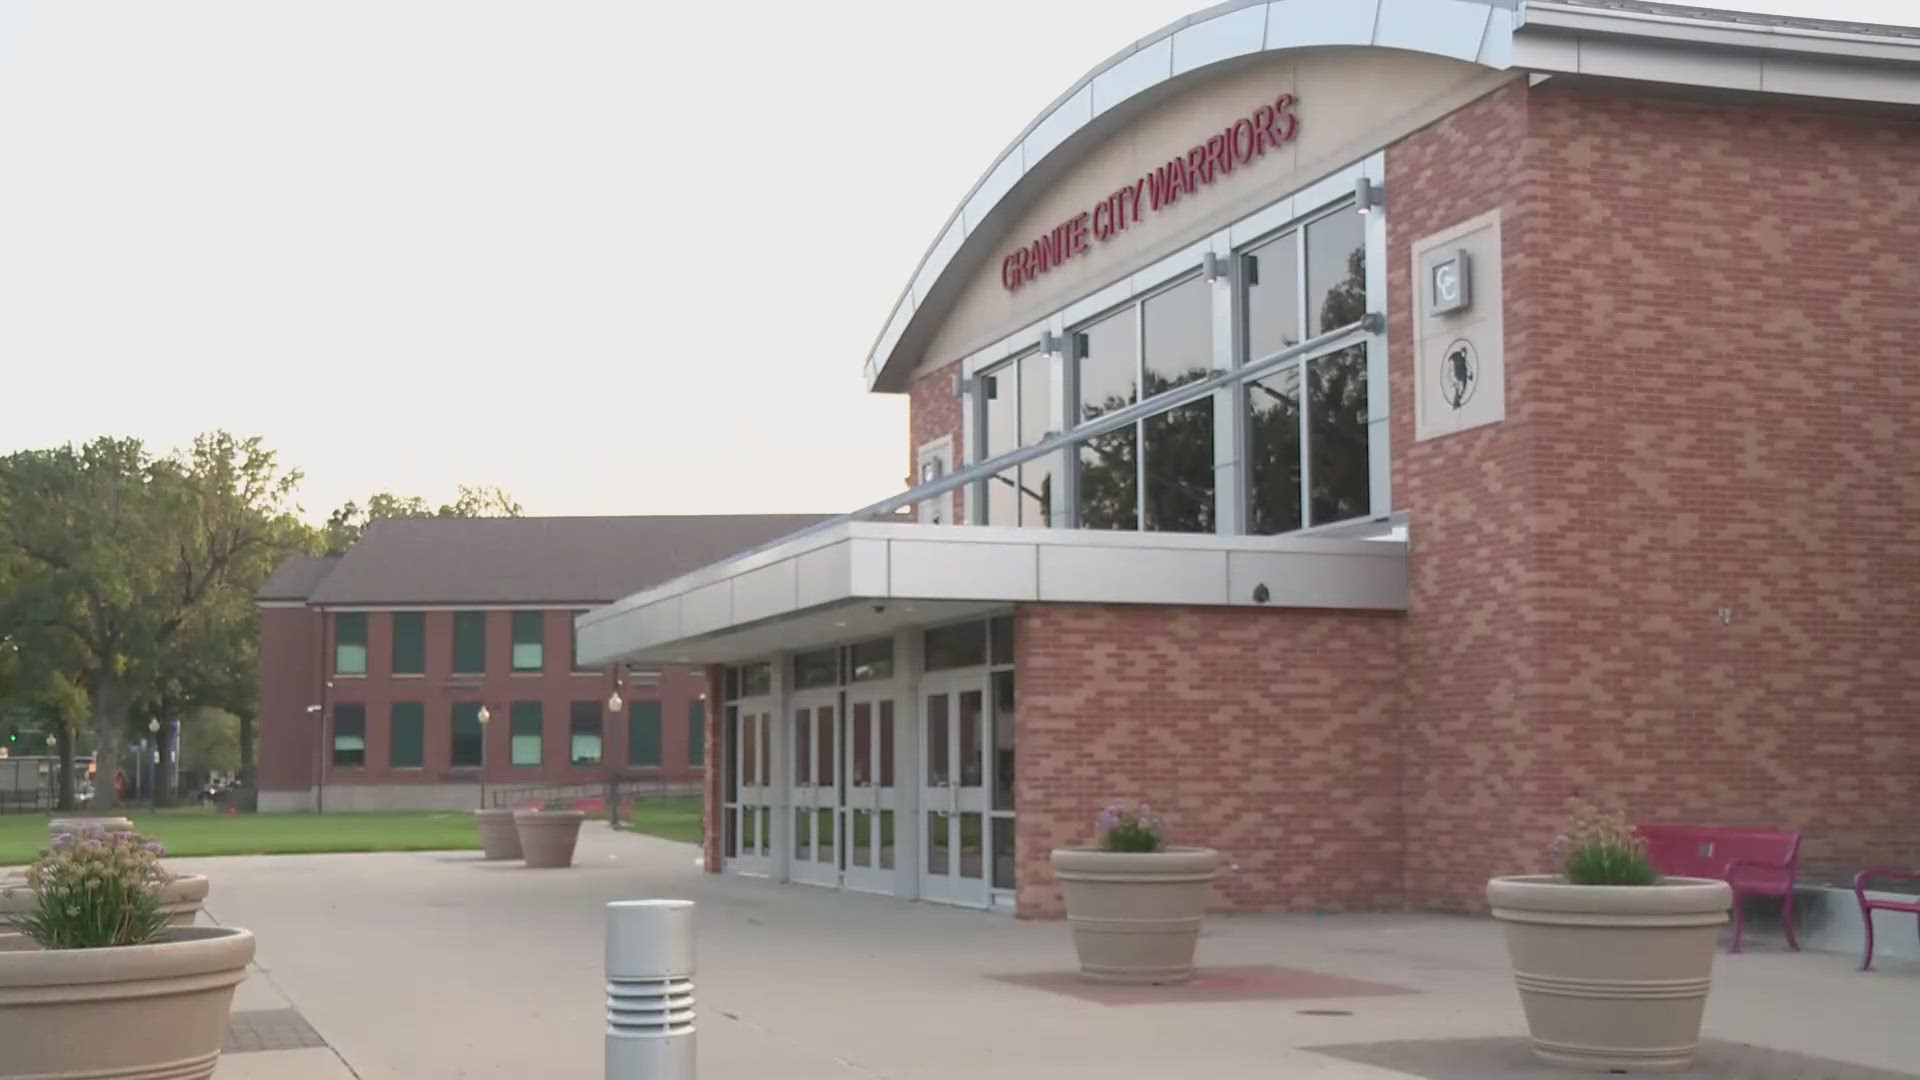 Students at Granite City High School will attend class remotely from Wednesday until Friday because of the sweltering hot temperatures.